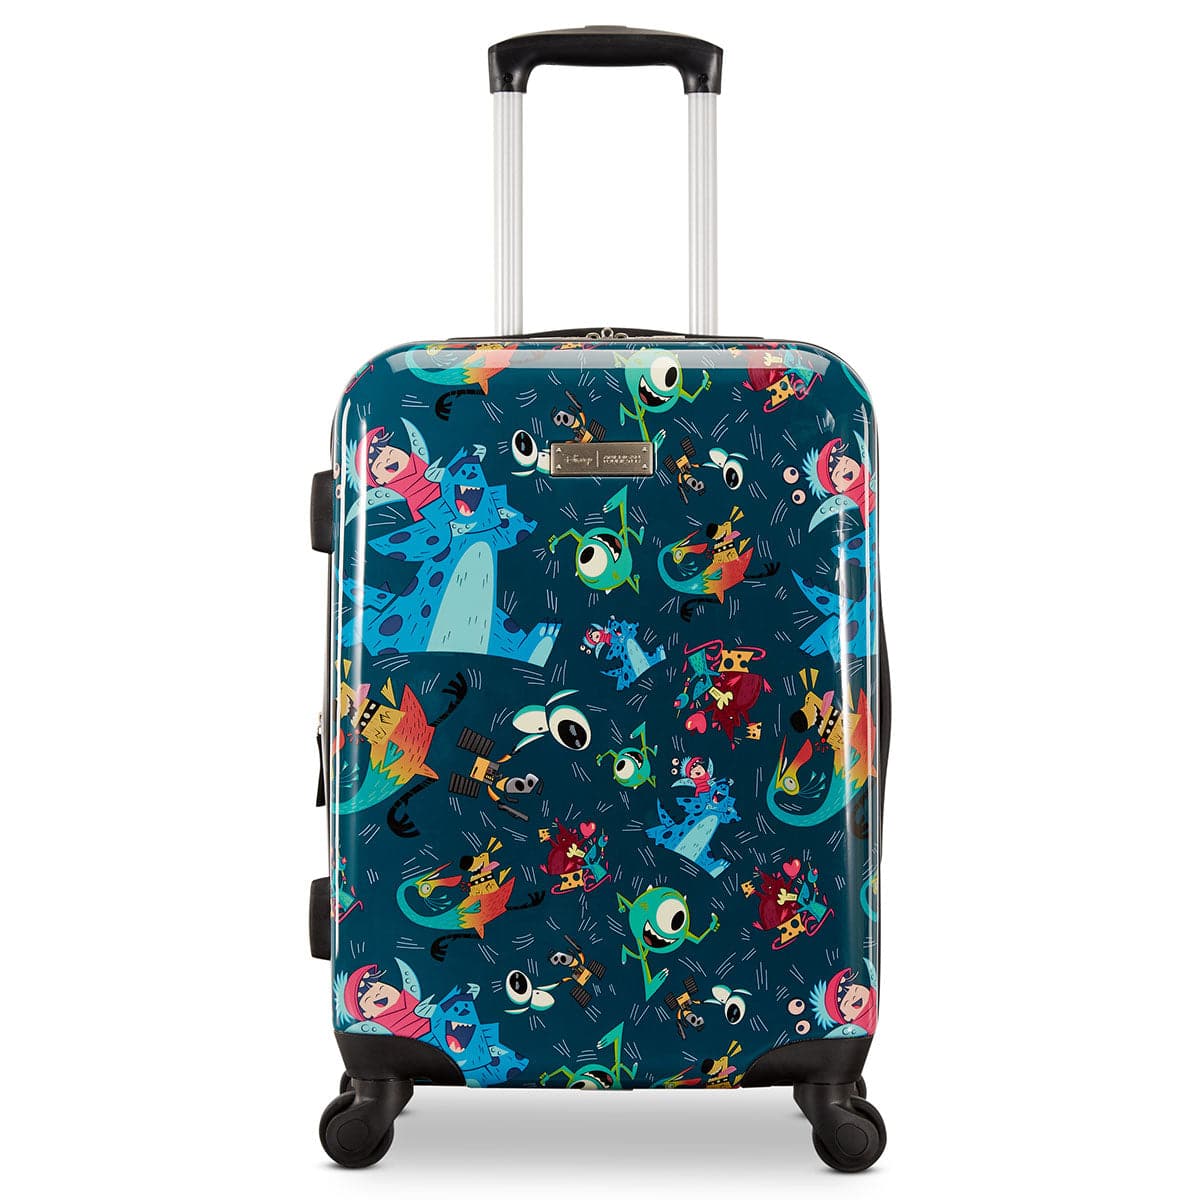 American Tourister Hardside Spinner Carry-On Luggage